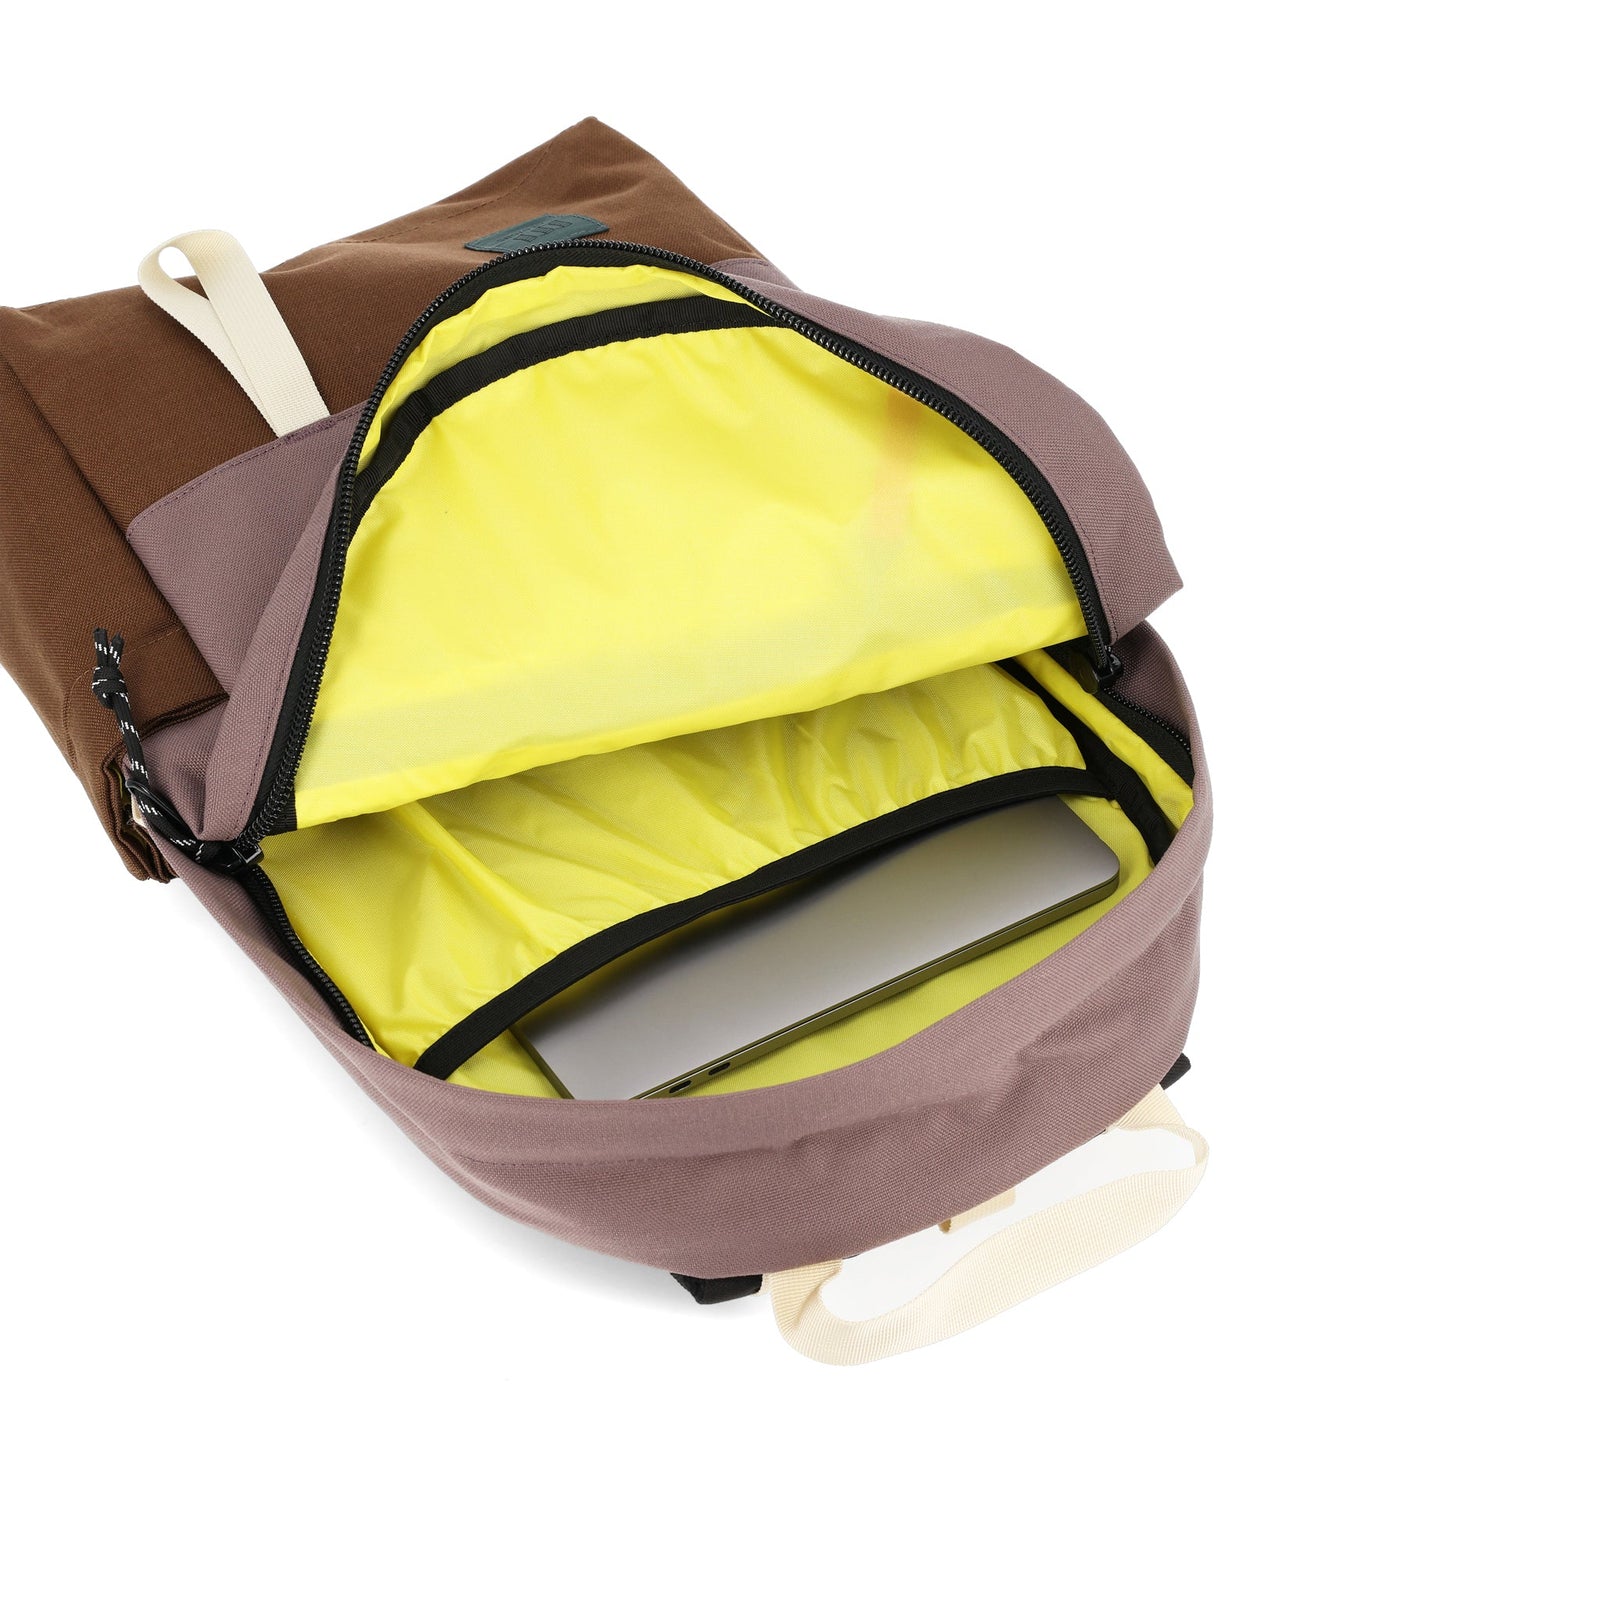 General detail of yellow interior and laptop sleeve on Topo Designs Daypack Classic 100% recycled nylon laptop backpack for work or school in "Peppercorn / Cocoa" purple brown